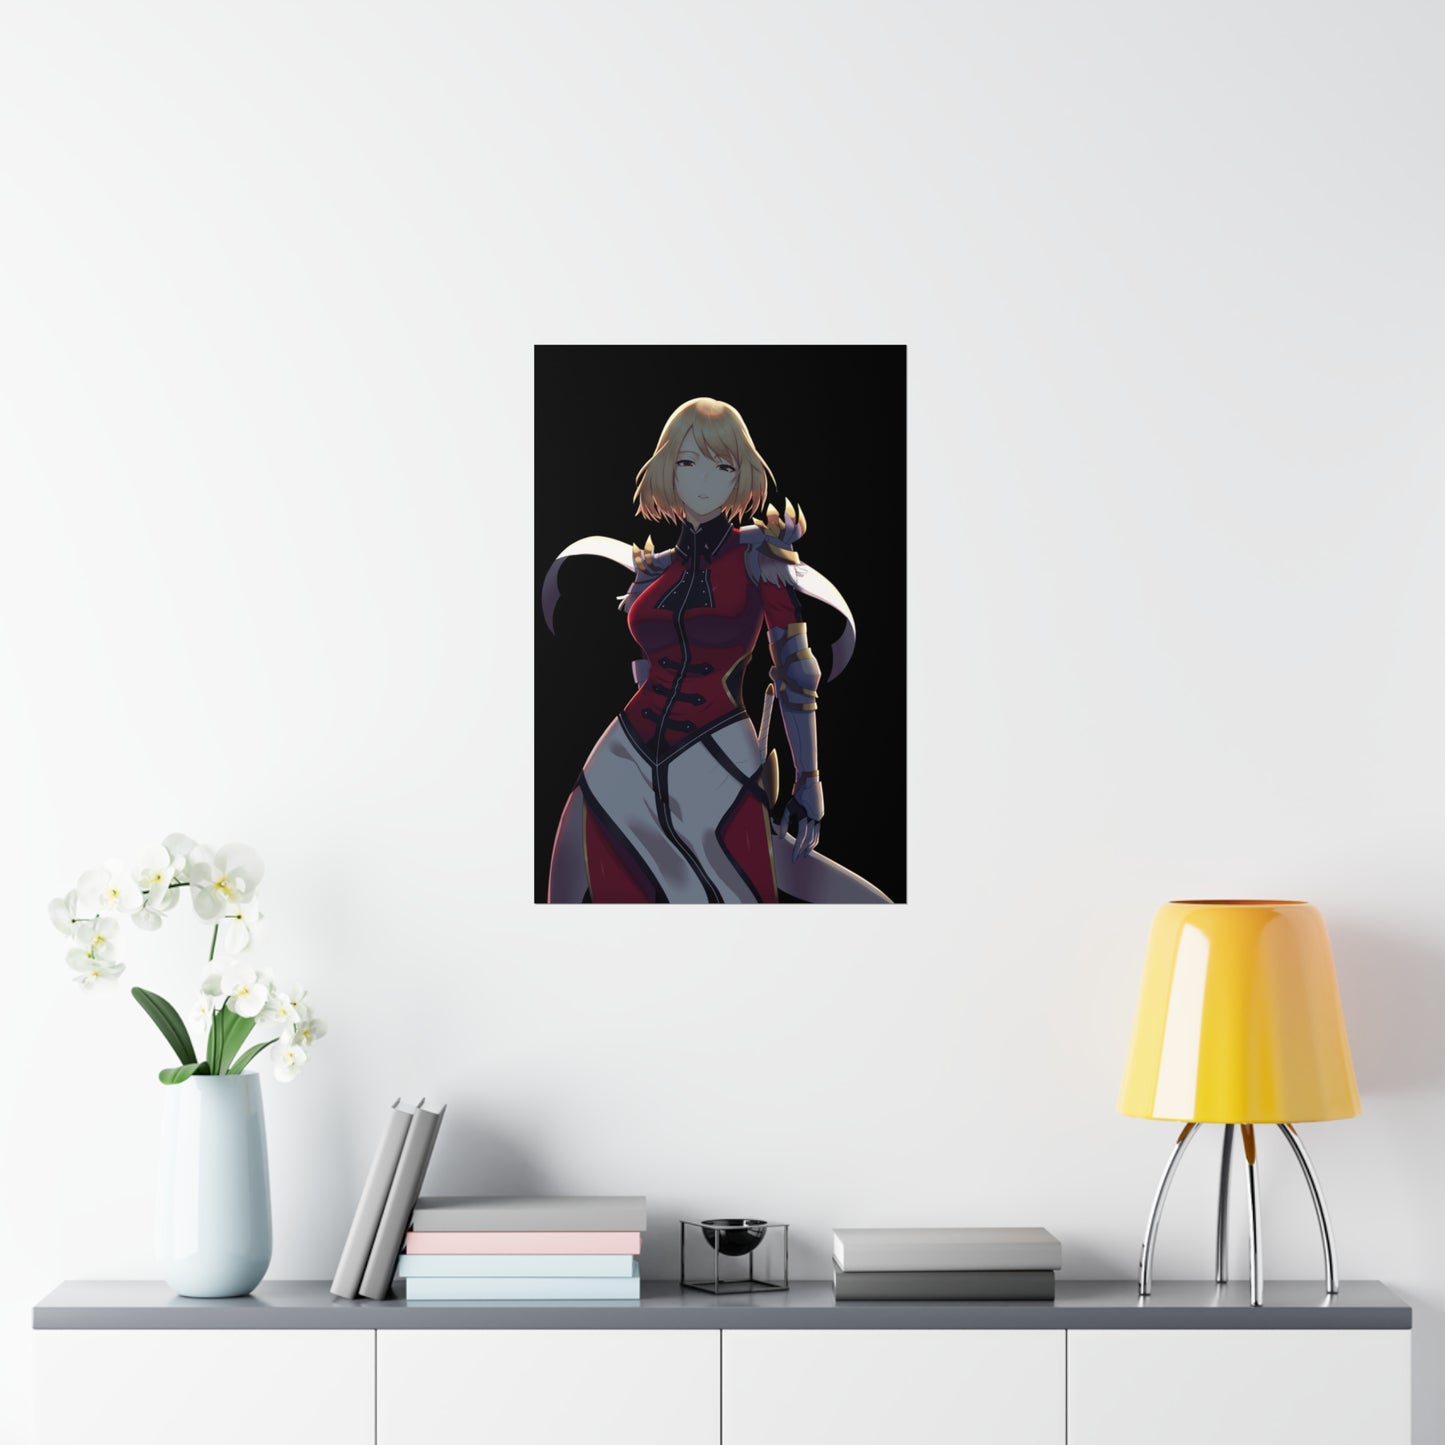 Cha Hae In Solo Leveling Poster - Premium Matte Vertical Poster - Anime Wall Art Decor